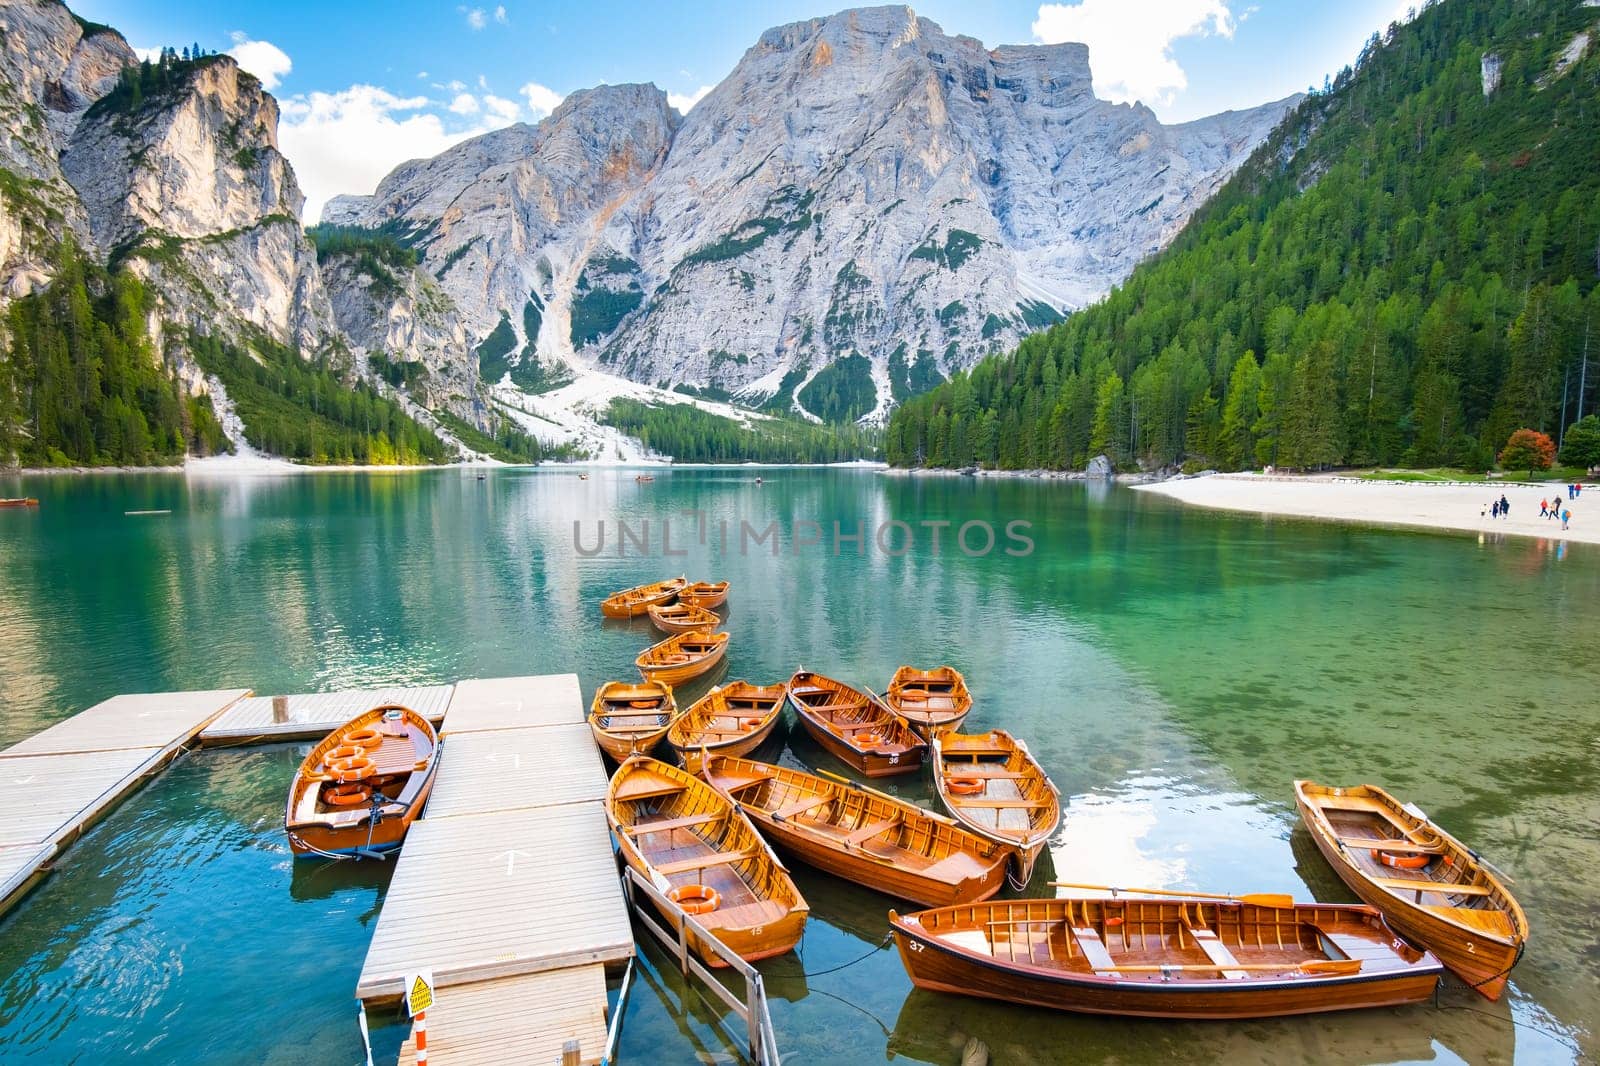 Boats on the Lake Braies in Dolomites mountains, Italy by vladimka